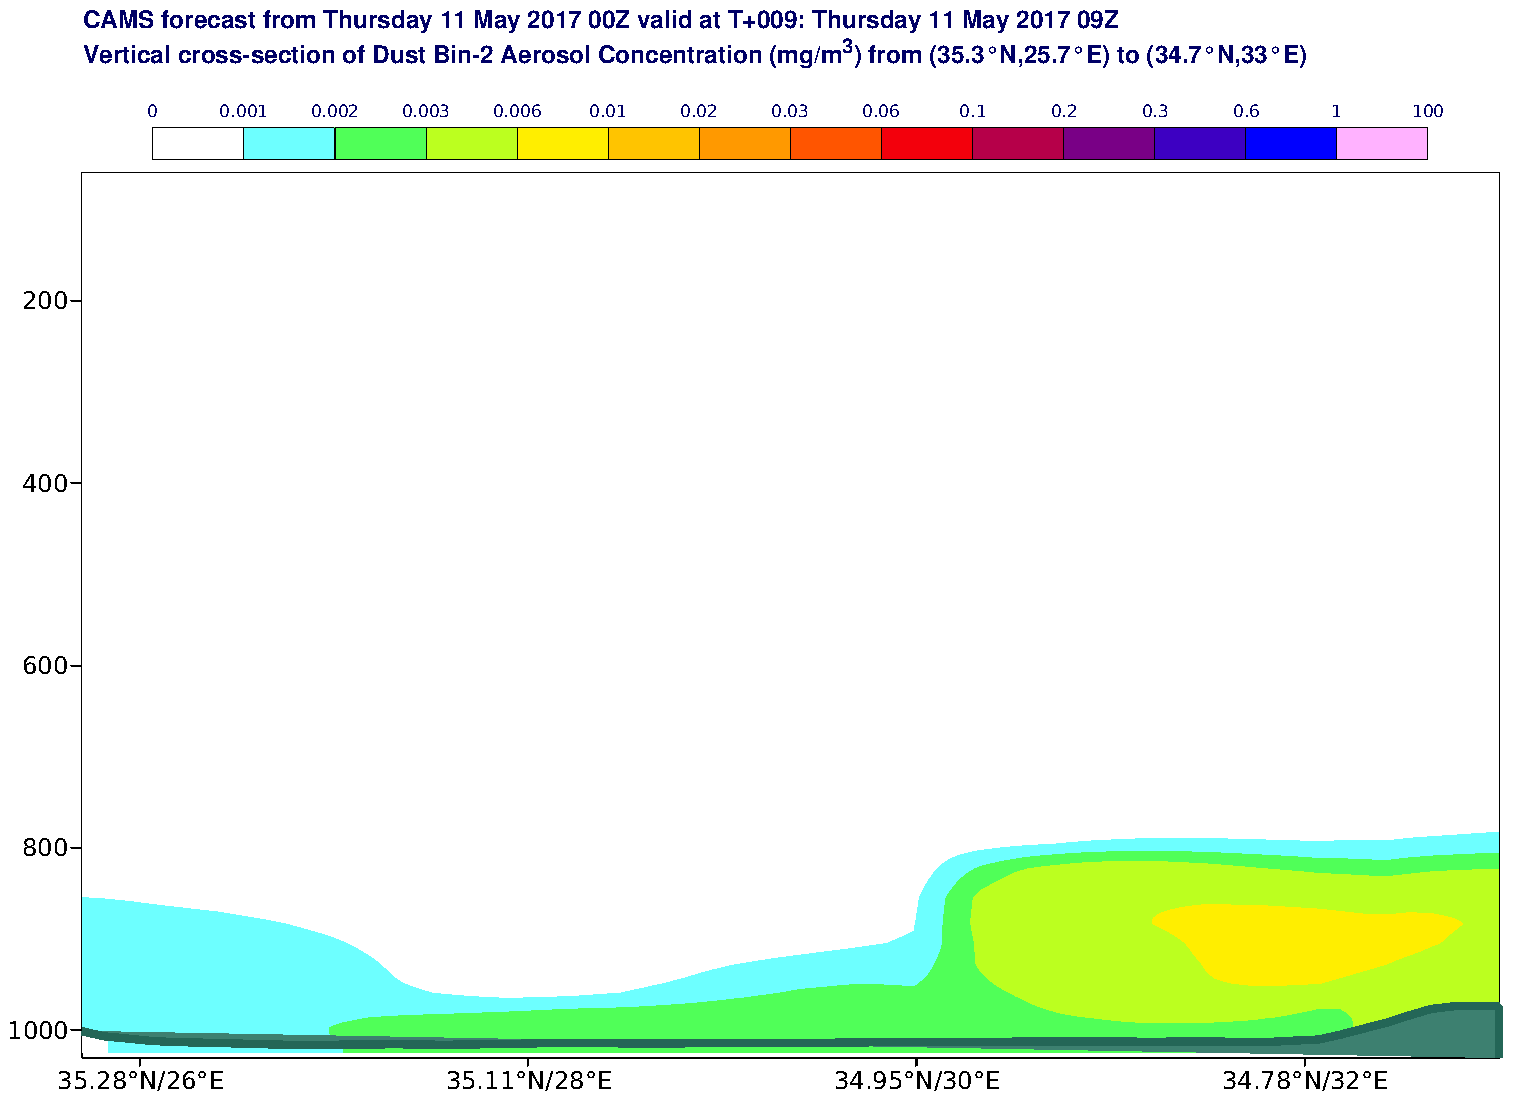 Vertical cross-section of Dust Bin-2 Aerosol Concentration (mg/m3) valid at T9 - 2017-05-11 09:00